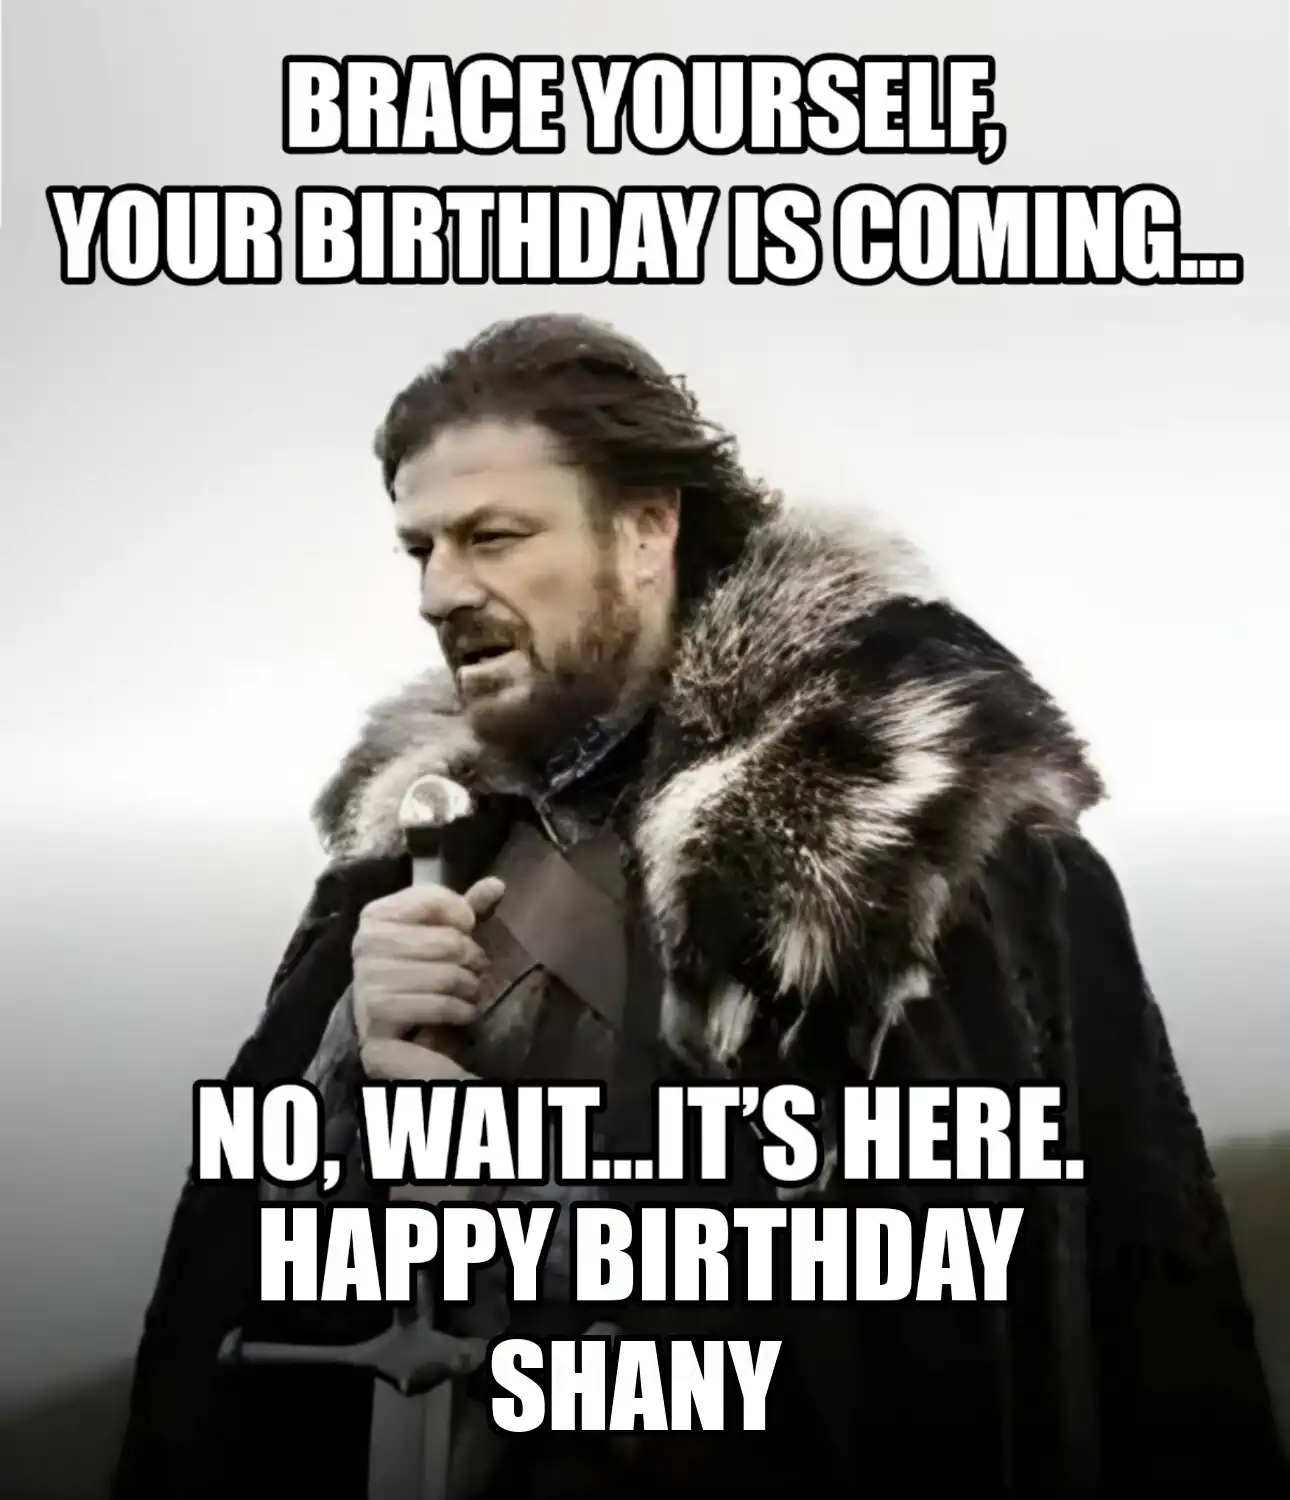 Happy Birthday Shany Brace Yourself Your Birthday Is Coming Meme